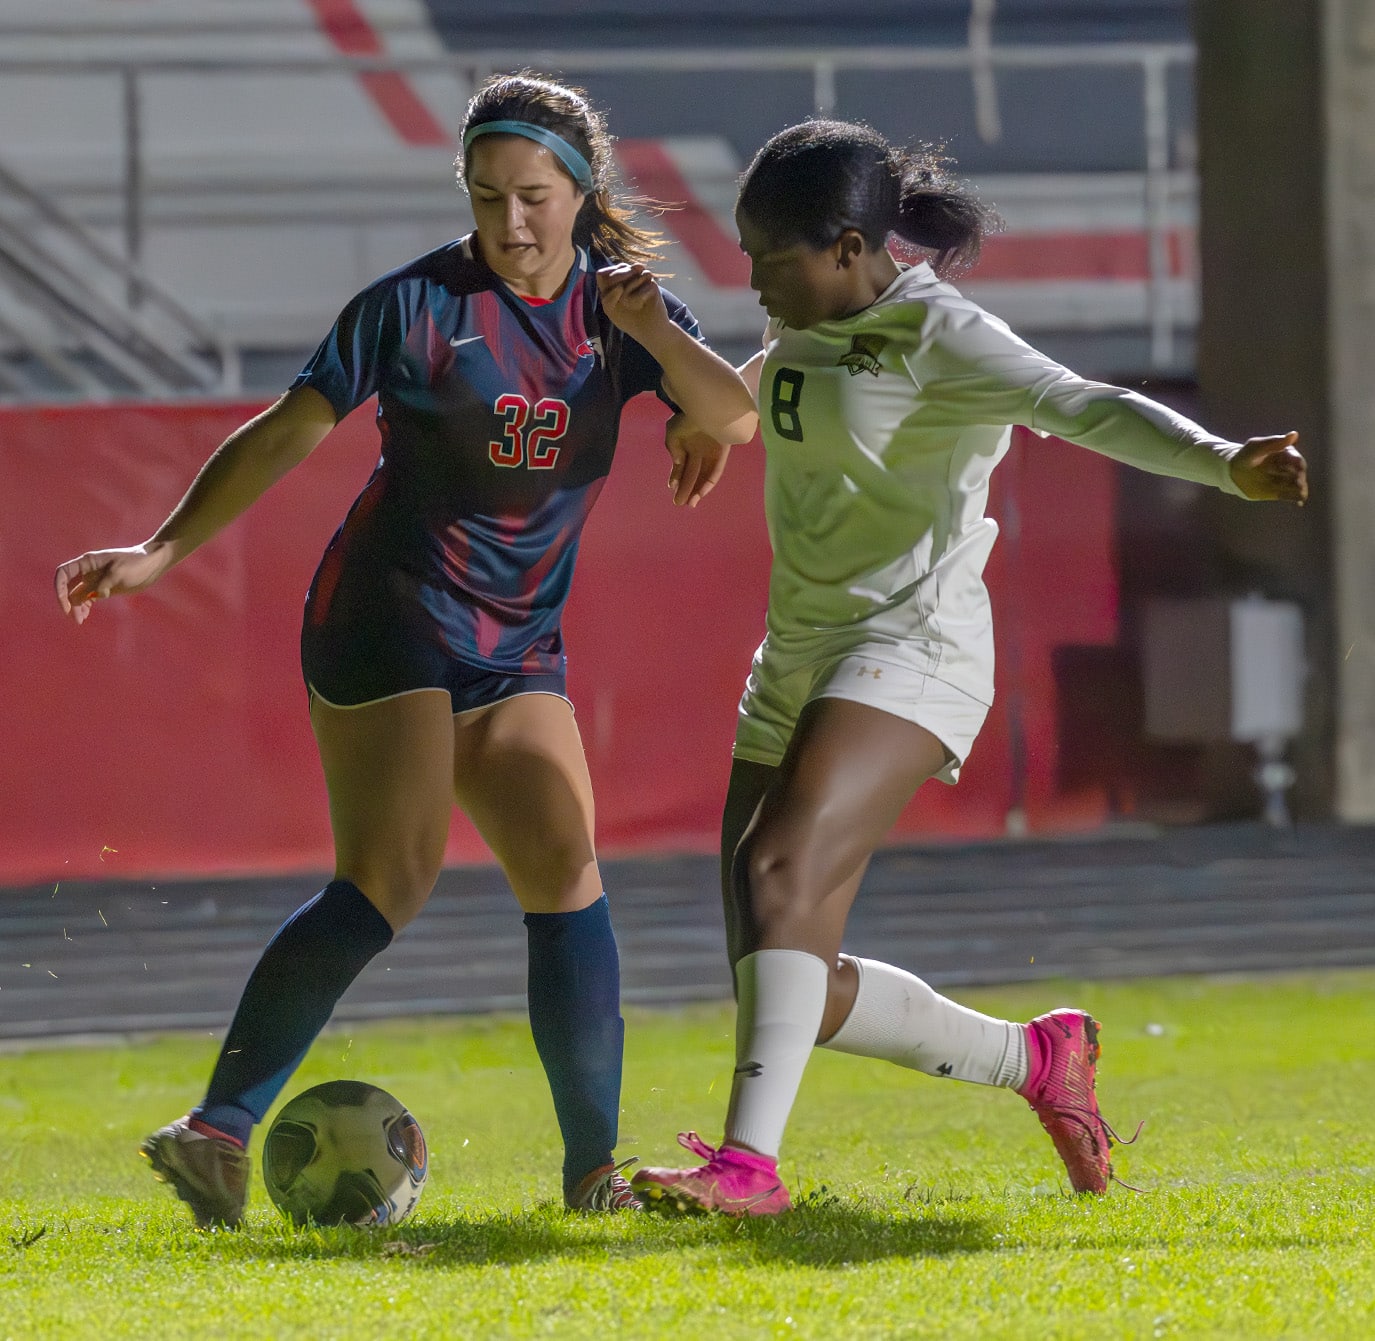 Springstead High, 32, Sidney Anderson possesses the ball while marked by Buchholz High defender, 8, Alisha Soults in the 6A District 4 semi-final game in Spring Hill. [Photo by Joe DiCristofalo]